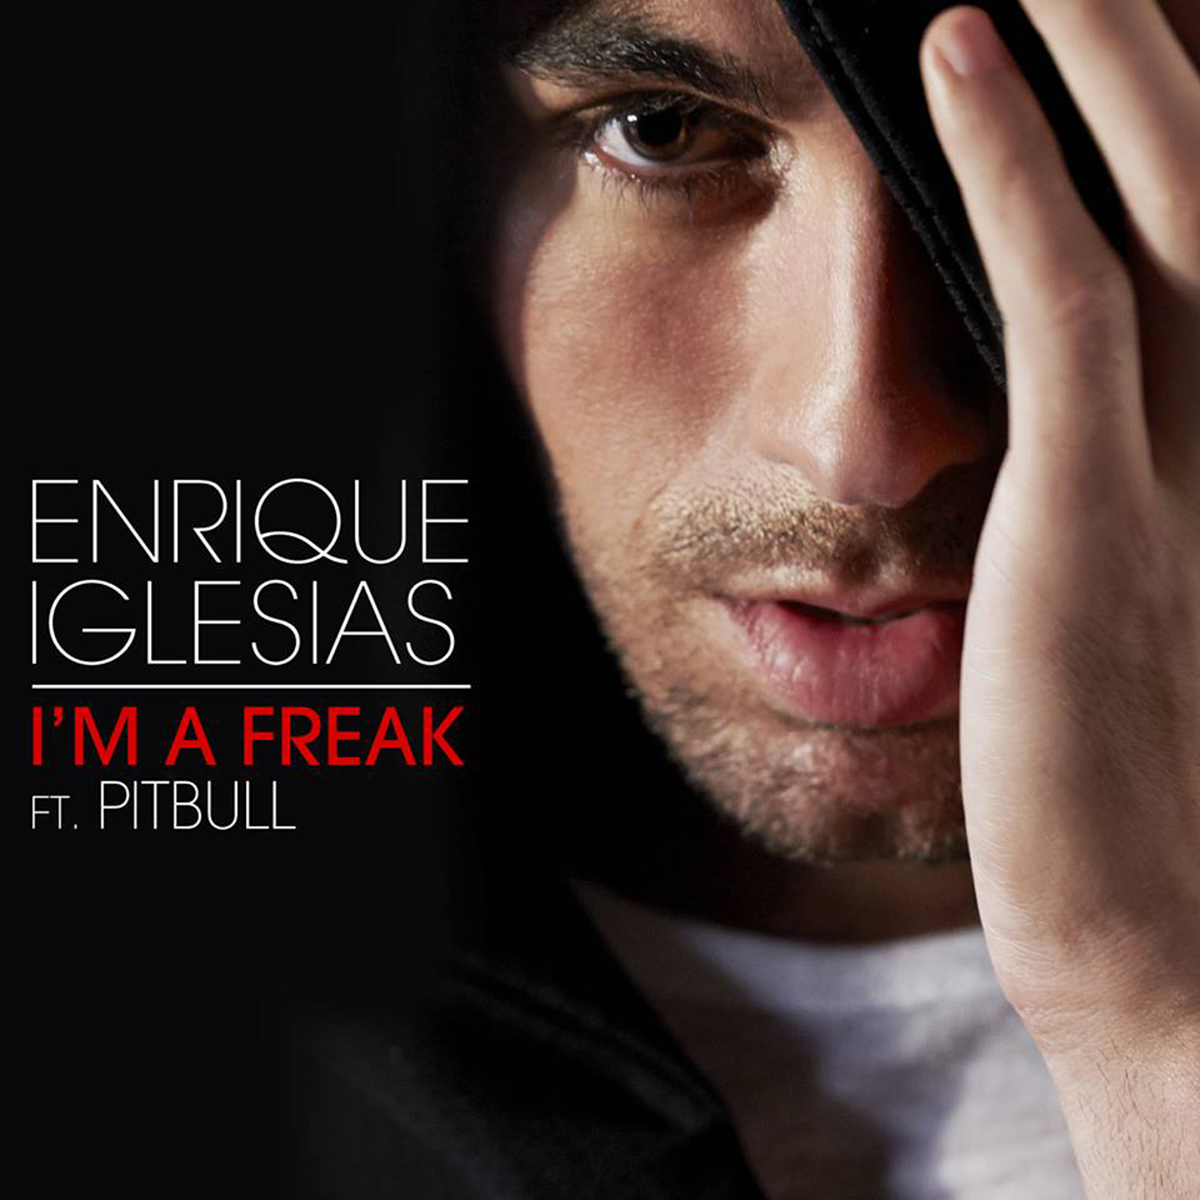 New Music Video by Enrique Iglesias Ft Pitbull